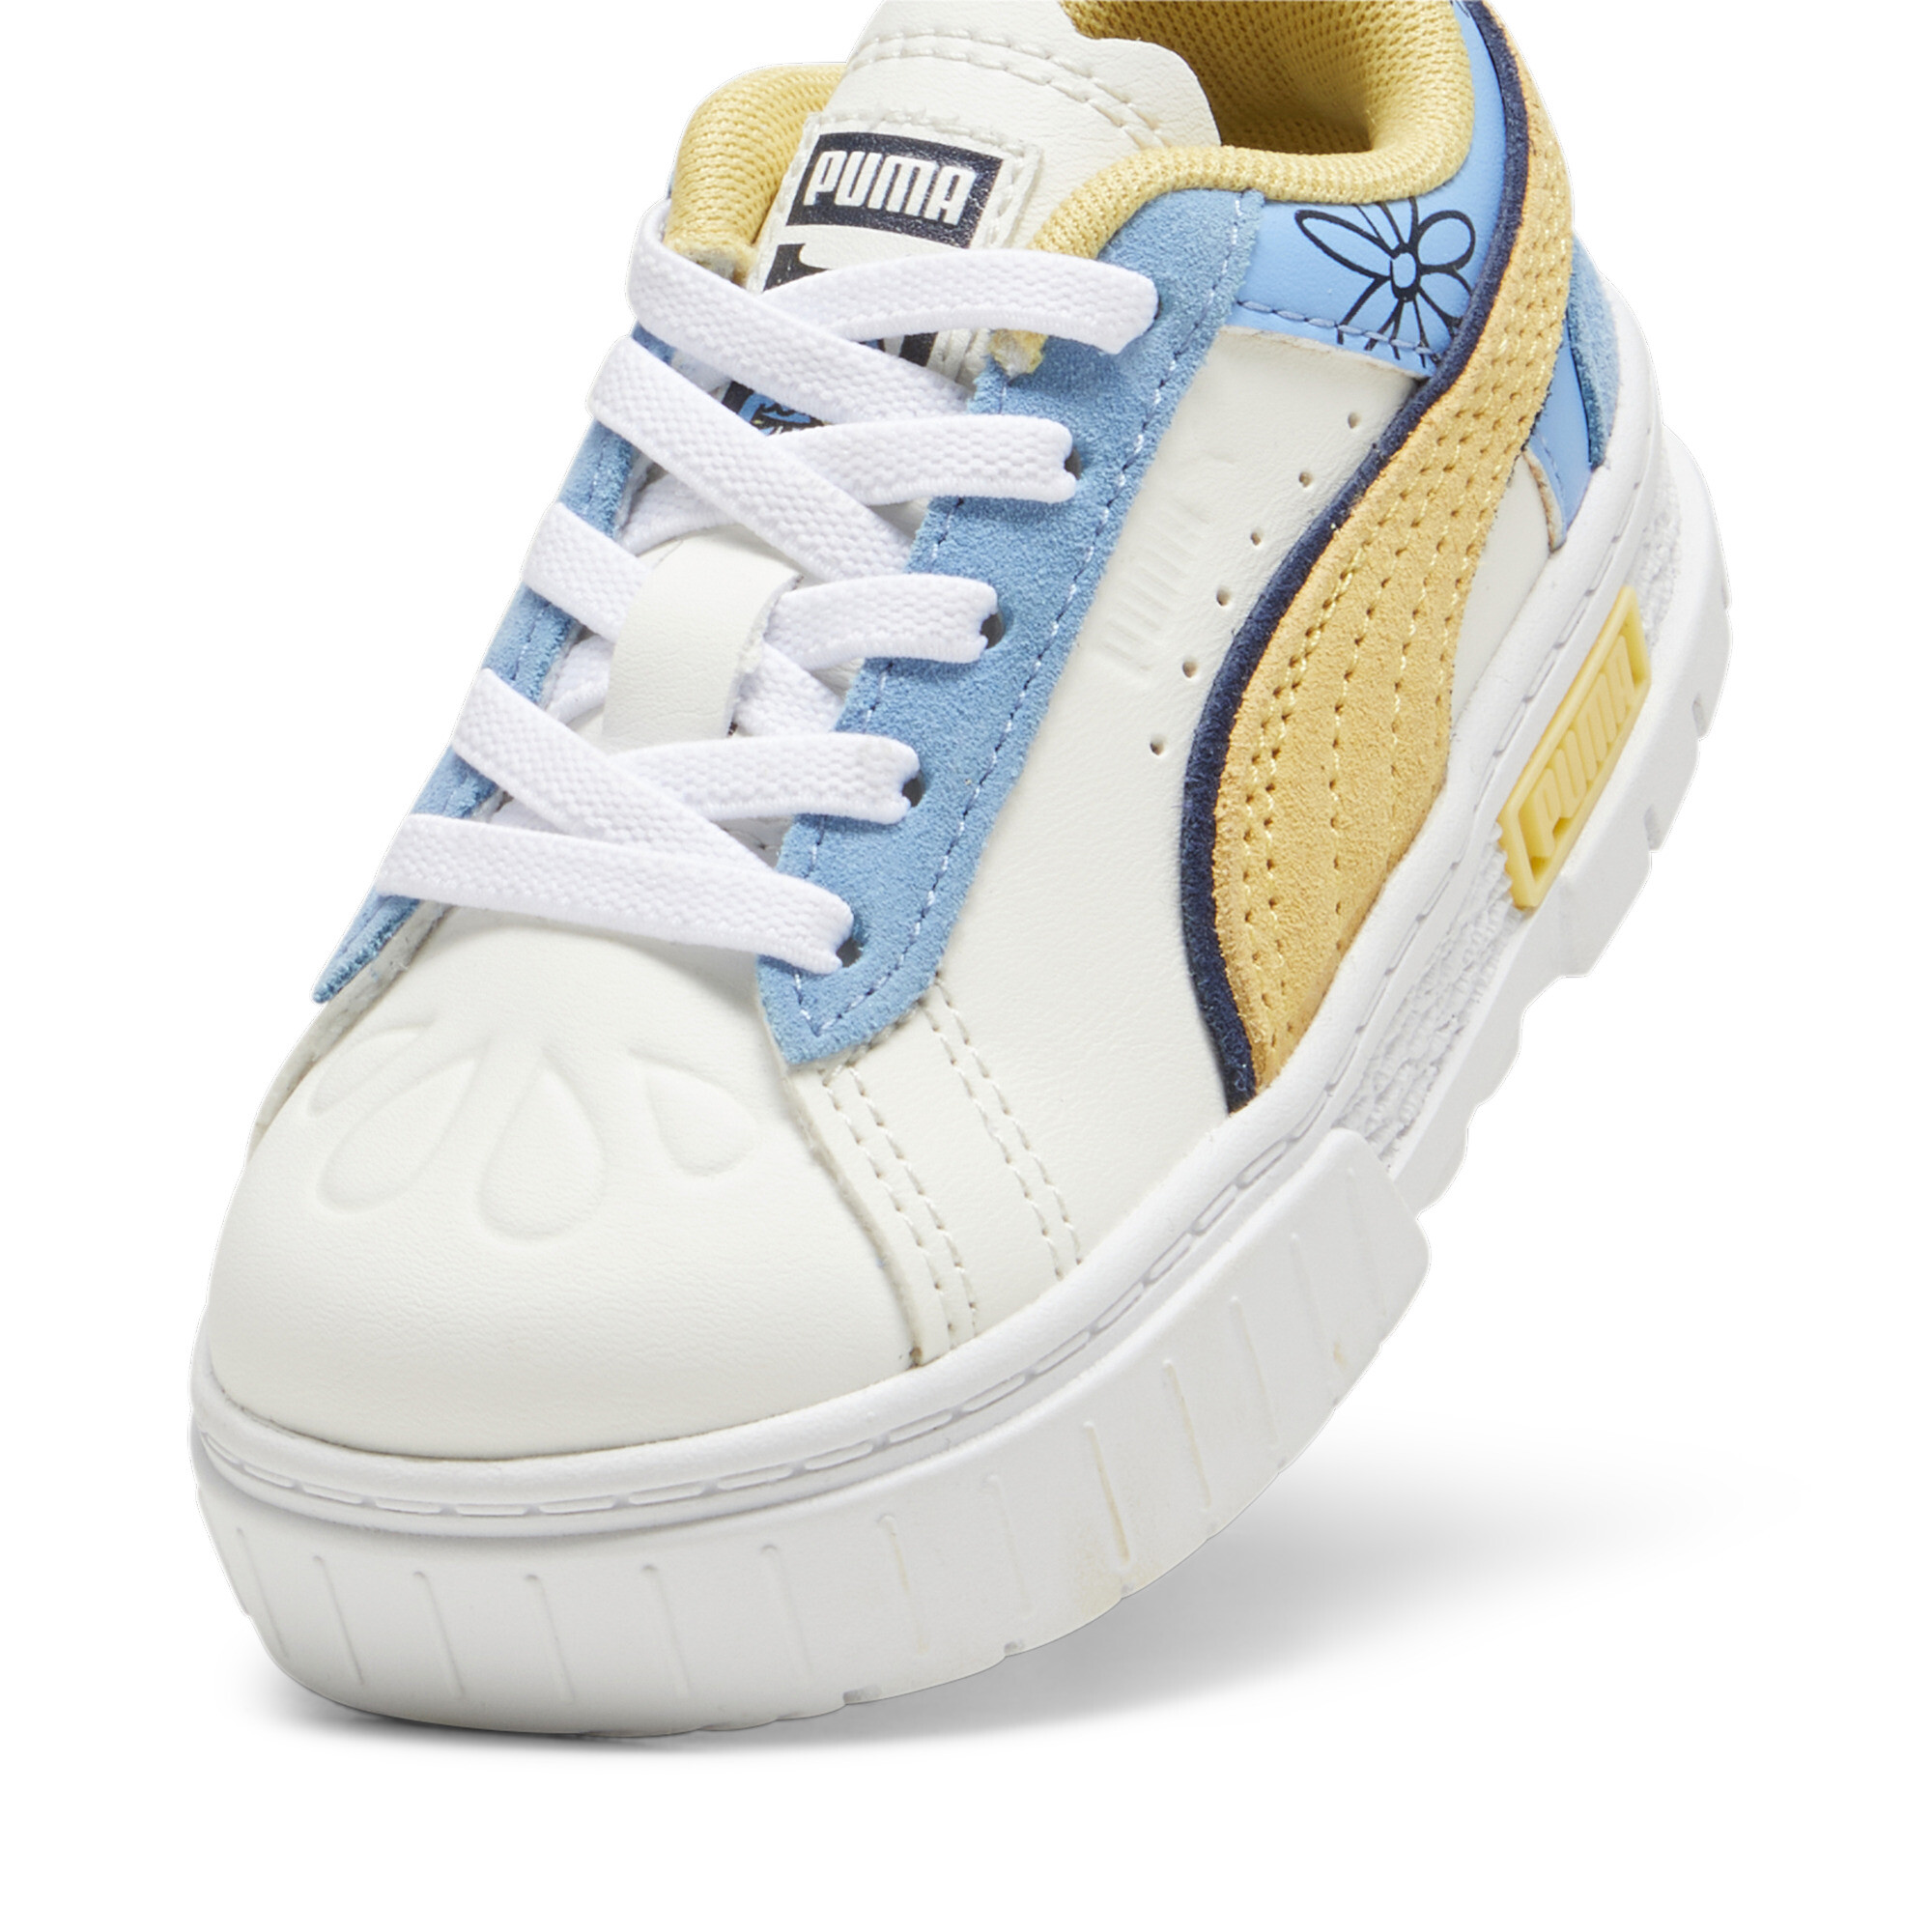 Women's Puma X THE SMURFS Mayze Toddlers' Sneakers, White, Size 24, Shoes